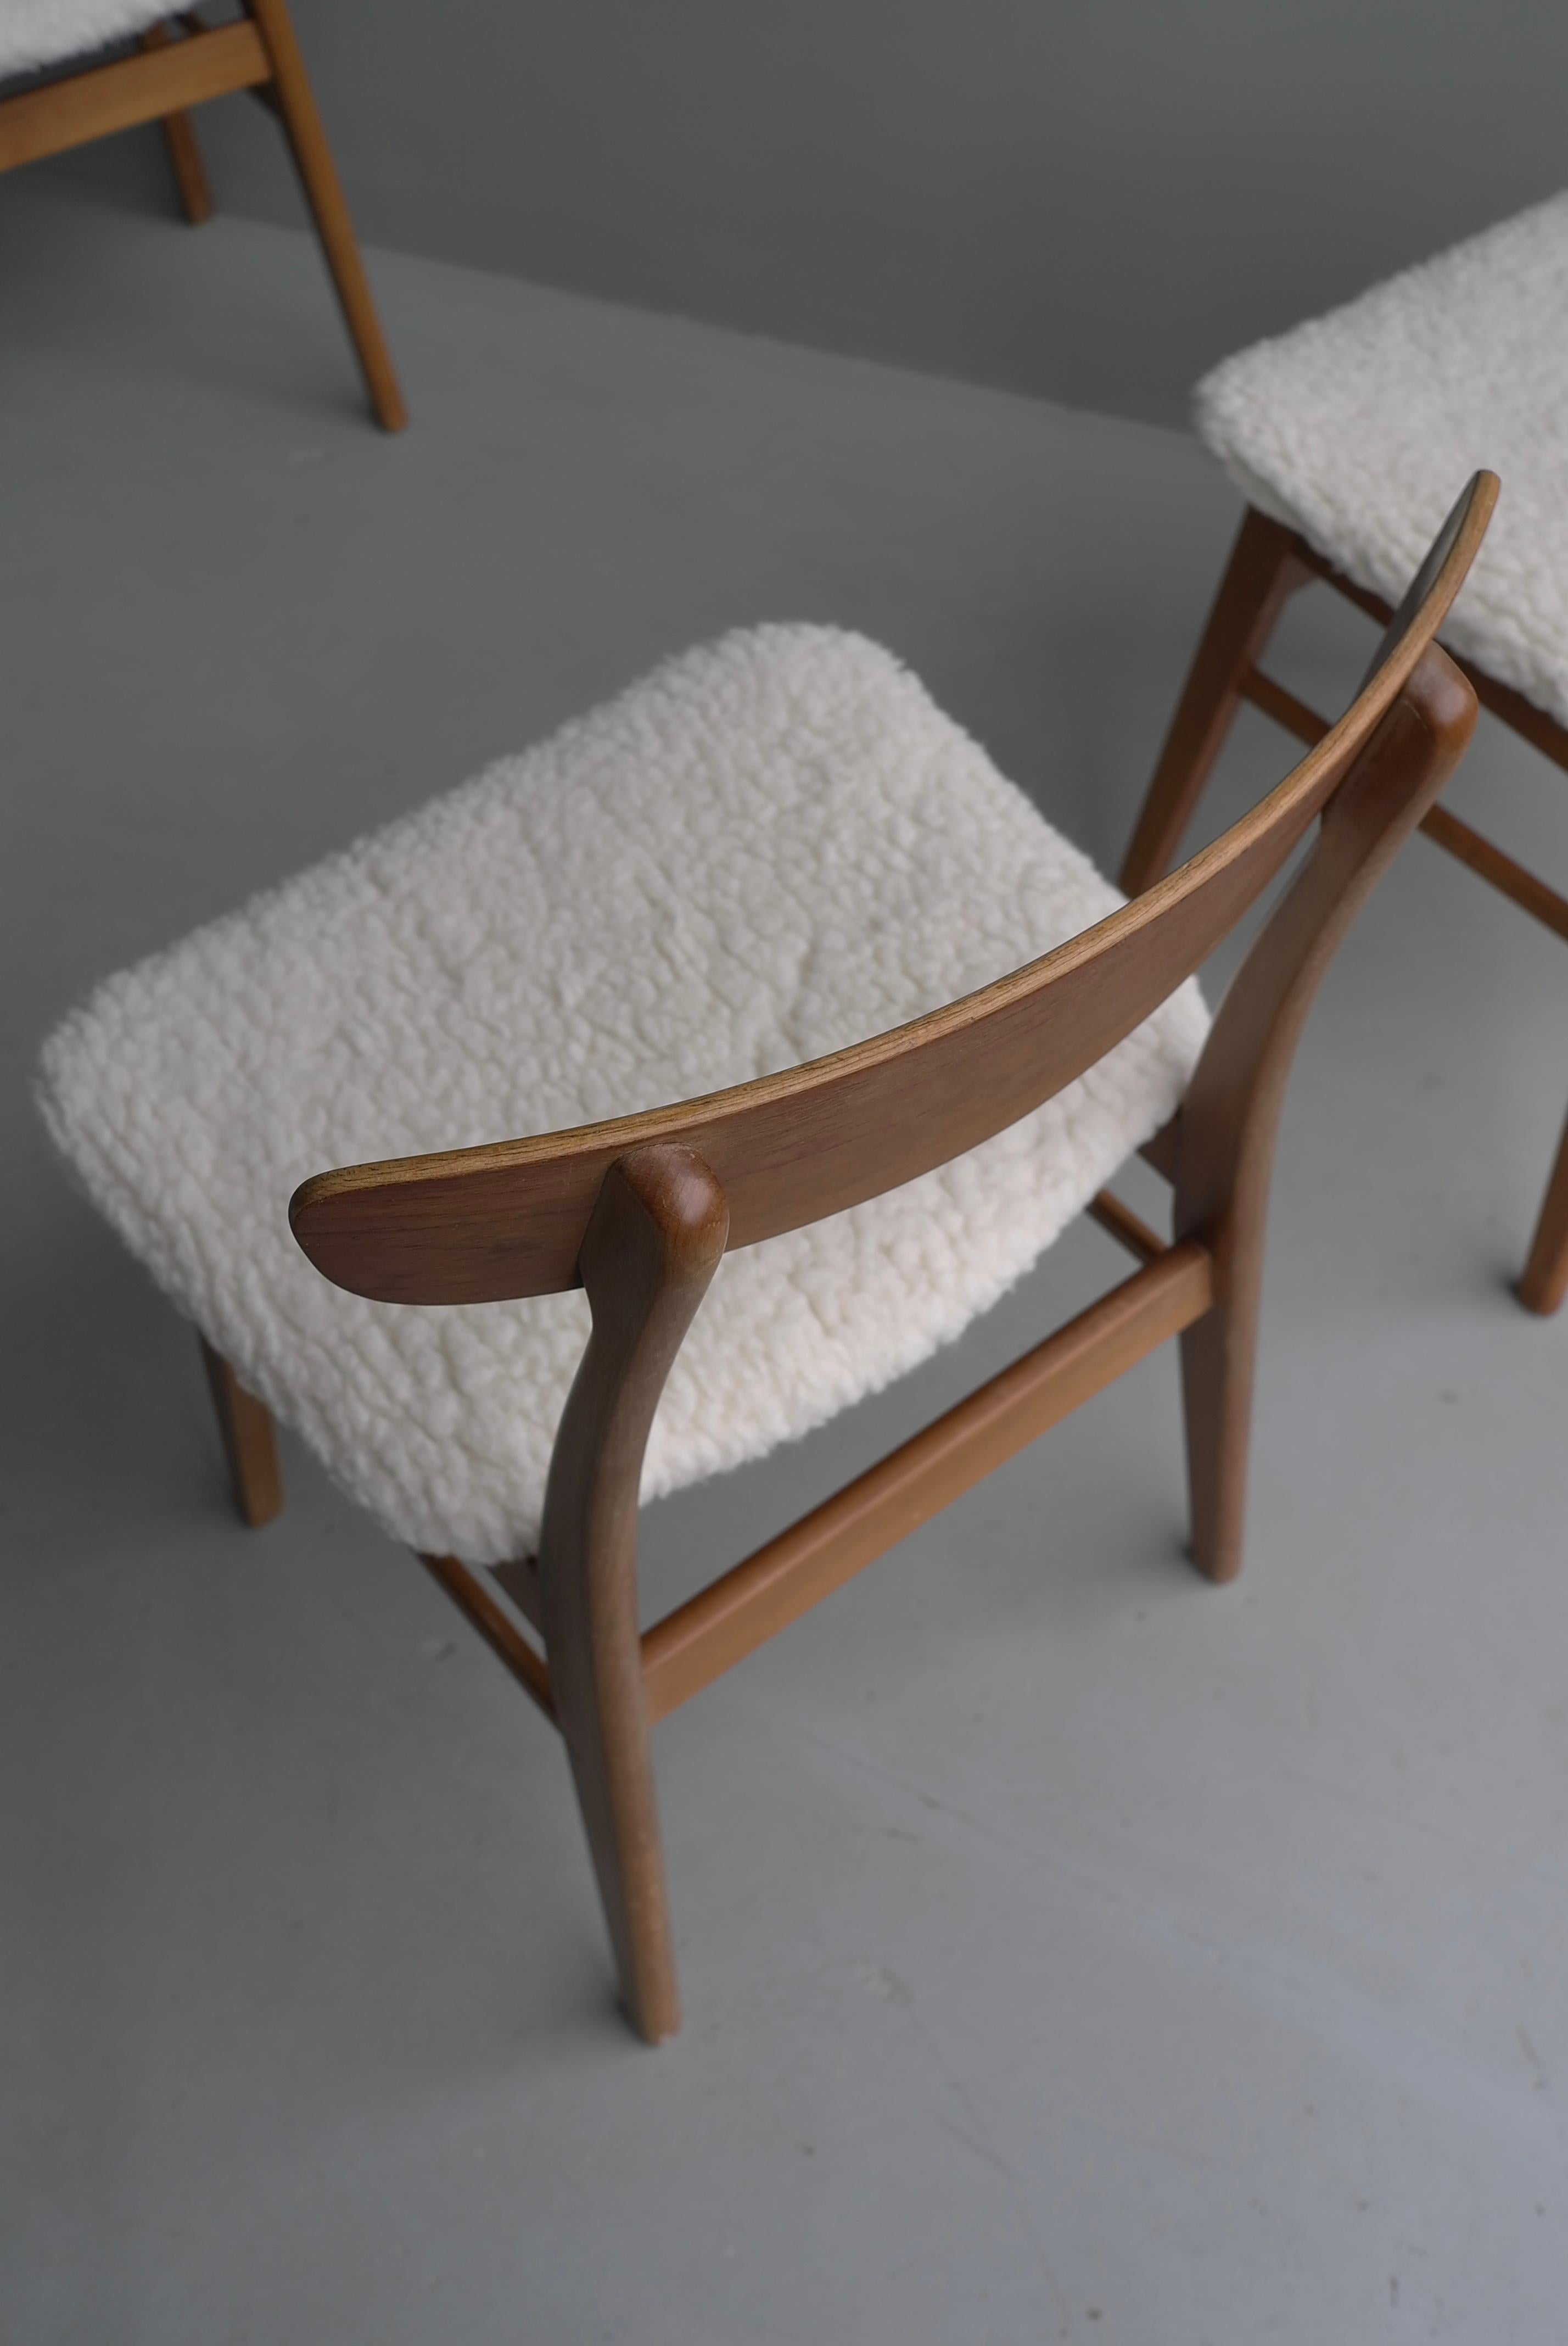 Six Teak Danish Heart Chairs with Seats in Pure Merino Wool, by Farstrup Møbler 1